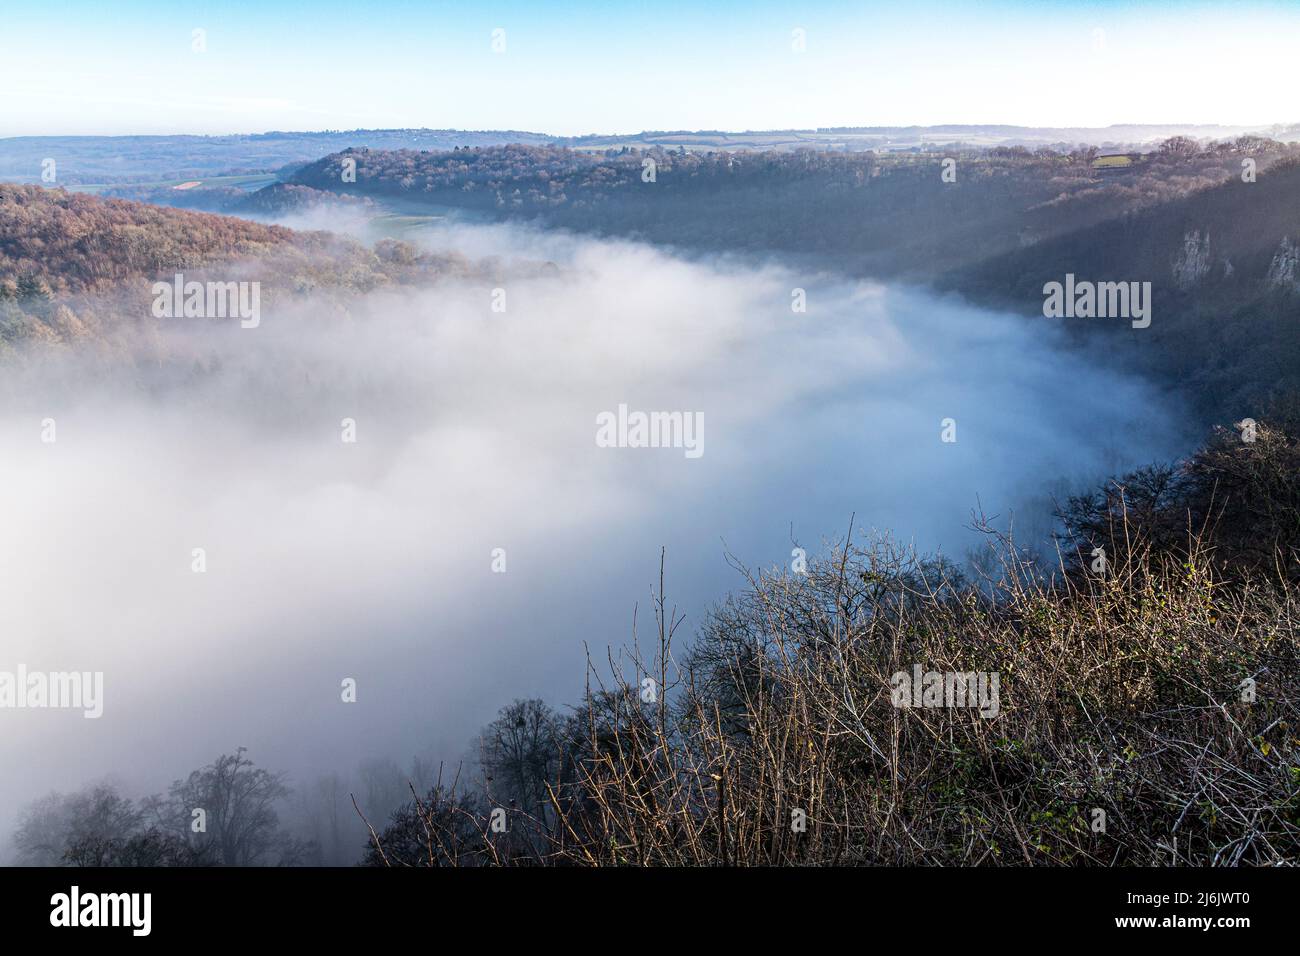 The River Wye totally obscured by mist due to a temperature inversion, seen from the viewpoint of Symonds Yat Rock, Herefordshire, England UK Stock Photo